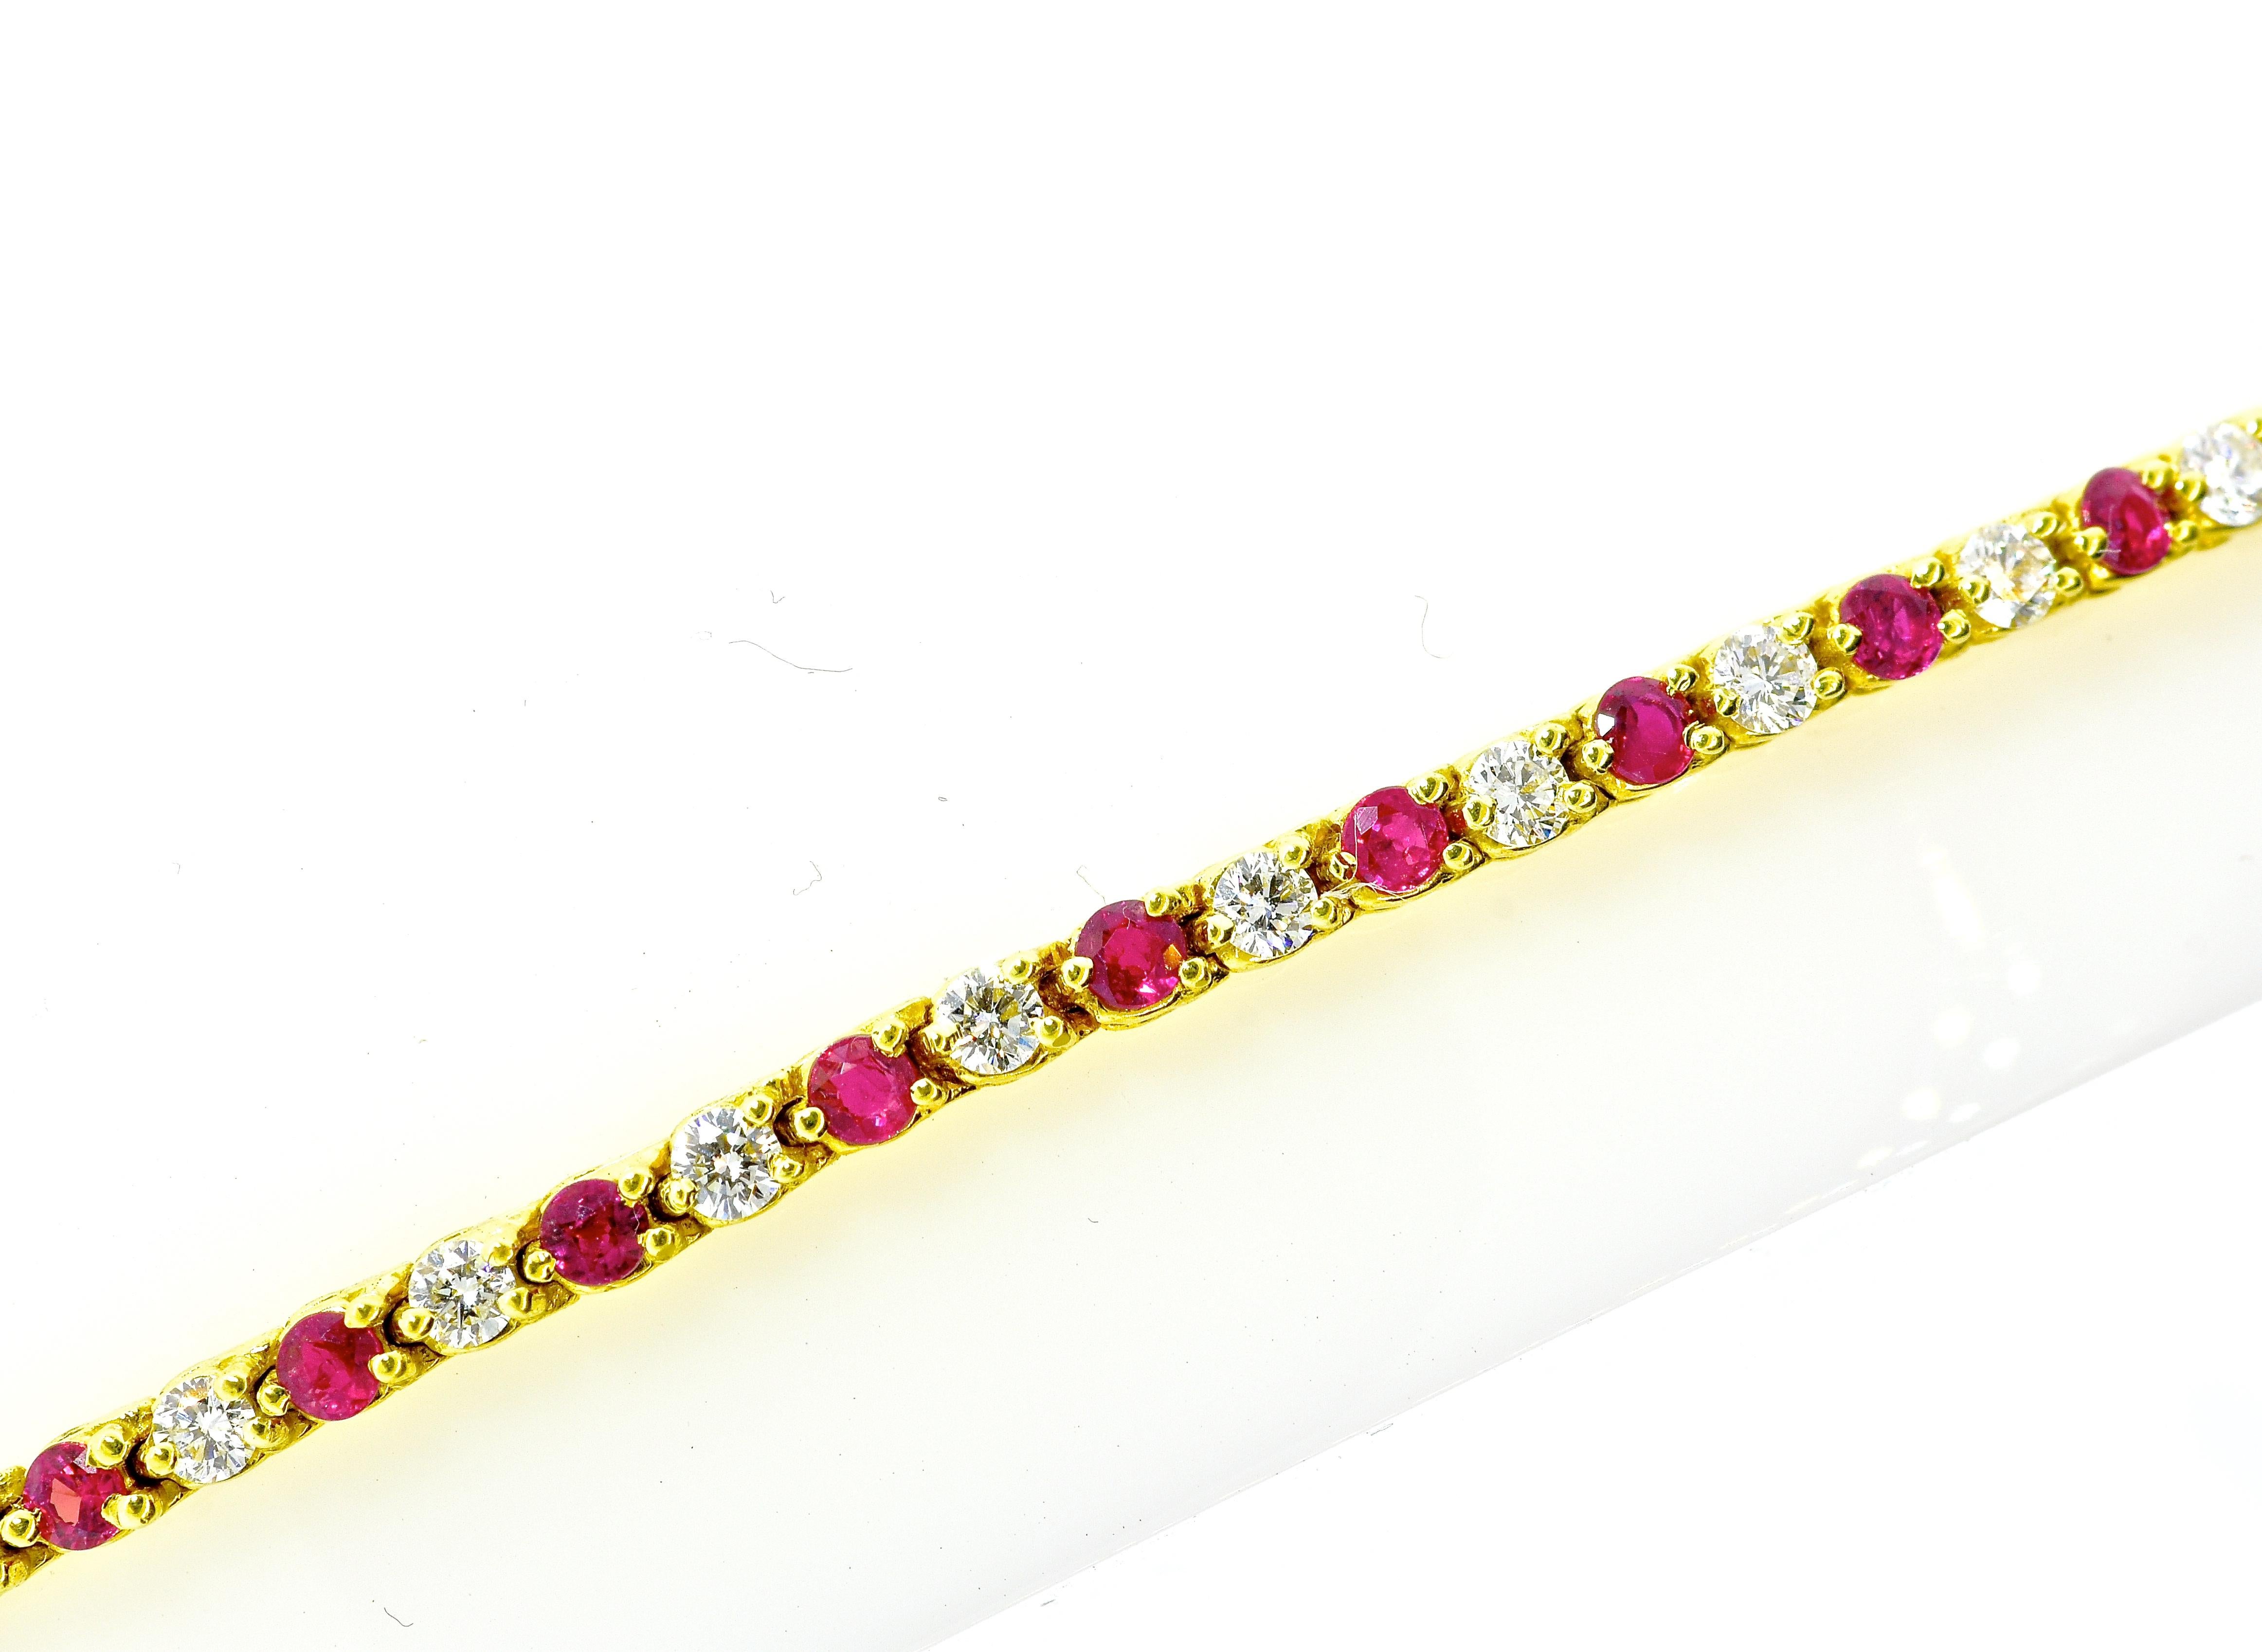 Ruby and diamond bracelet in 18K yellow gold.  There are 13 well matched and well cut round brilliant cut diamonds estimated to weigh .78 cts.  These diamonds are near colorless (H) and very slightly included (VS1).  Interspersed are 14 fine natural